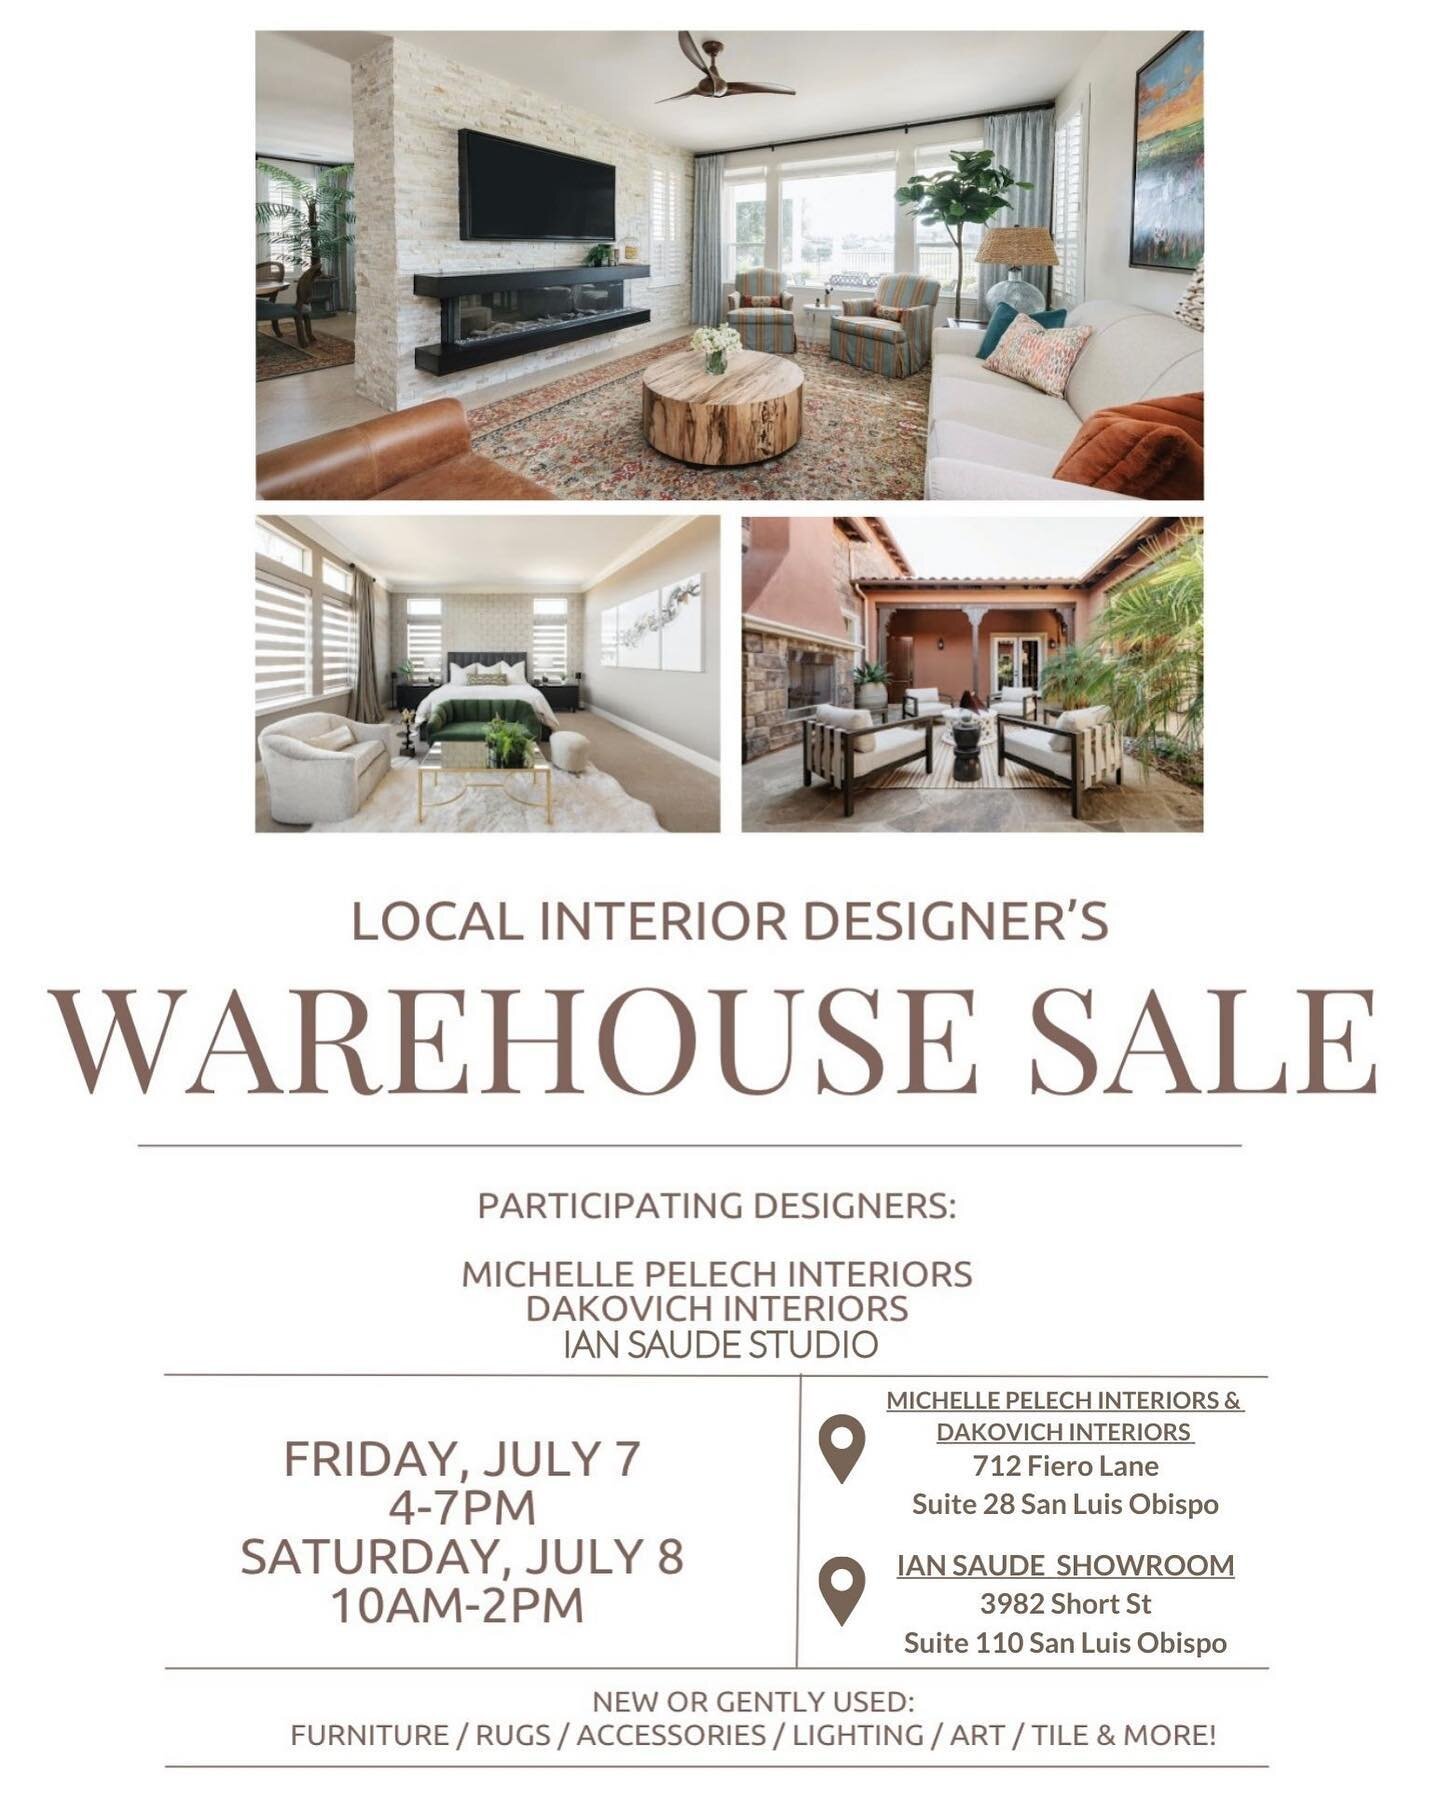 Don&rsquo;t miss this Warehouse Sale! This Friday &amp; Saturday! @michelle_pelech_interiors @iansaudeinc &amp; Dacovich Interiors